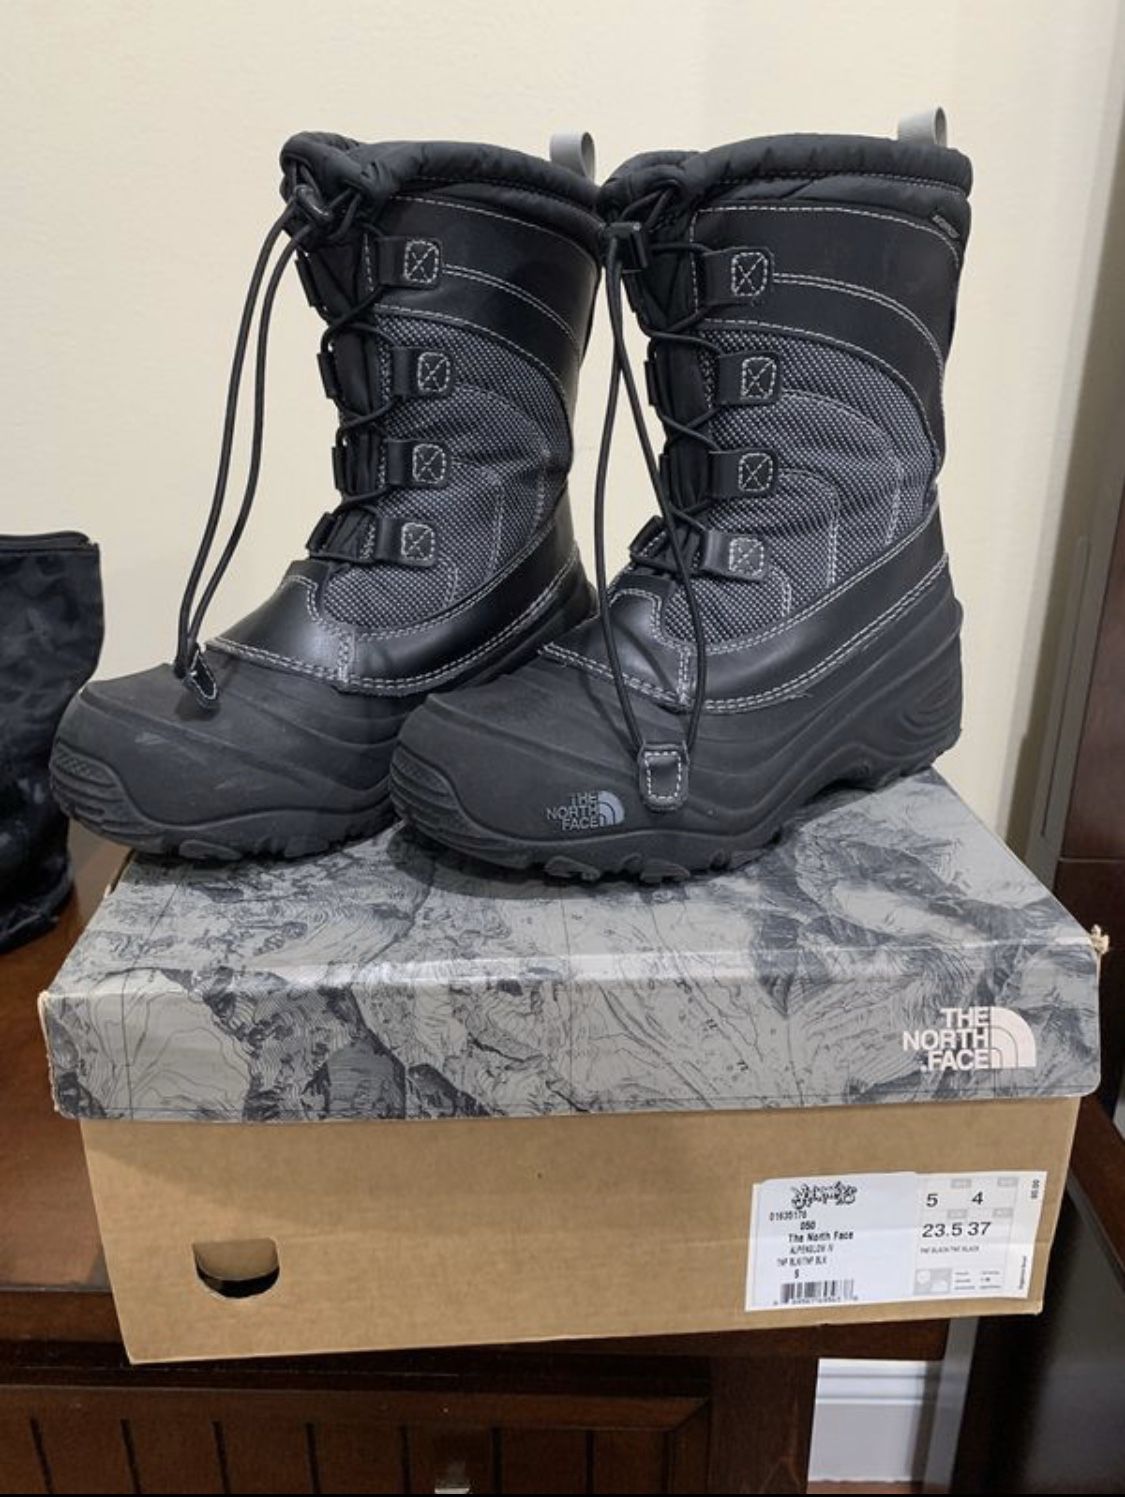 Kids north face winter/snow boots size 5 $25